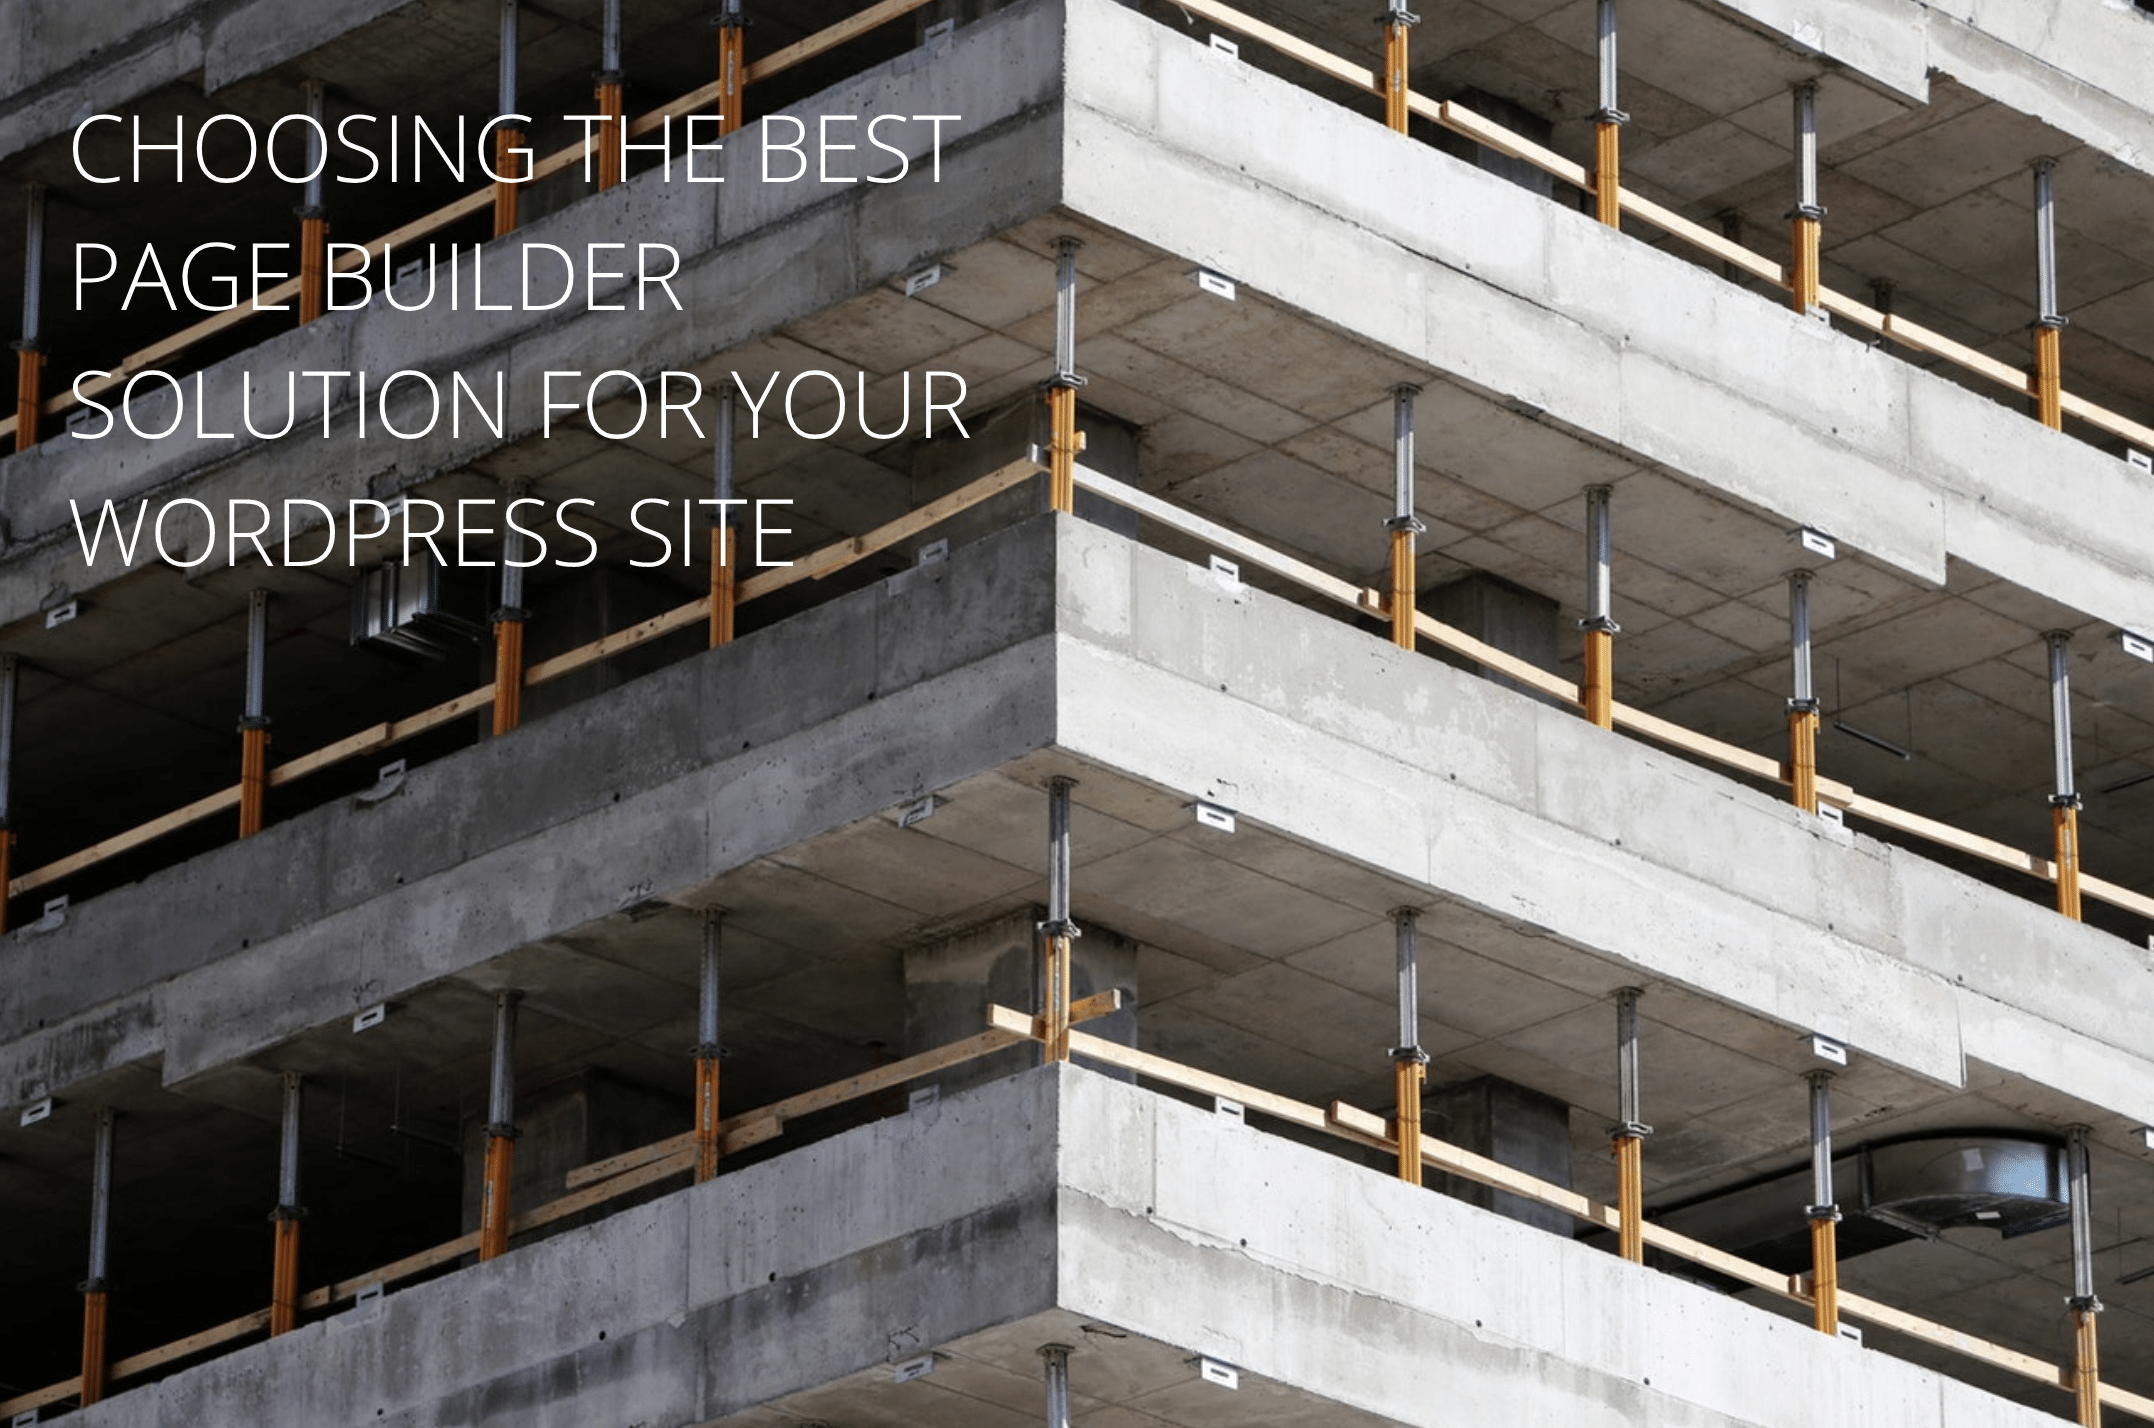 Divi vs WordPress - How to Choose the Best Way to Build a Website